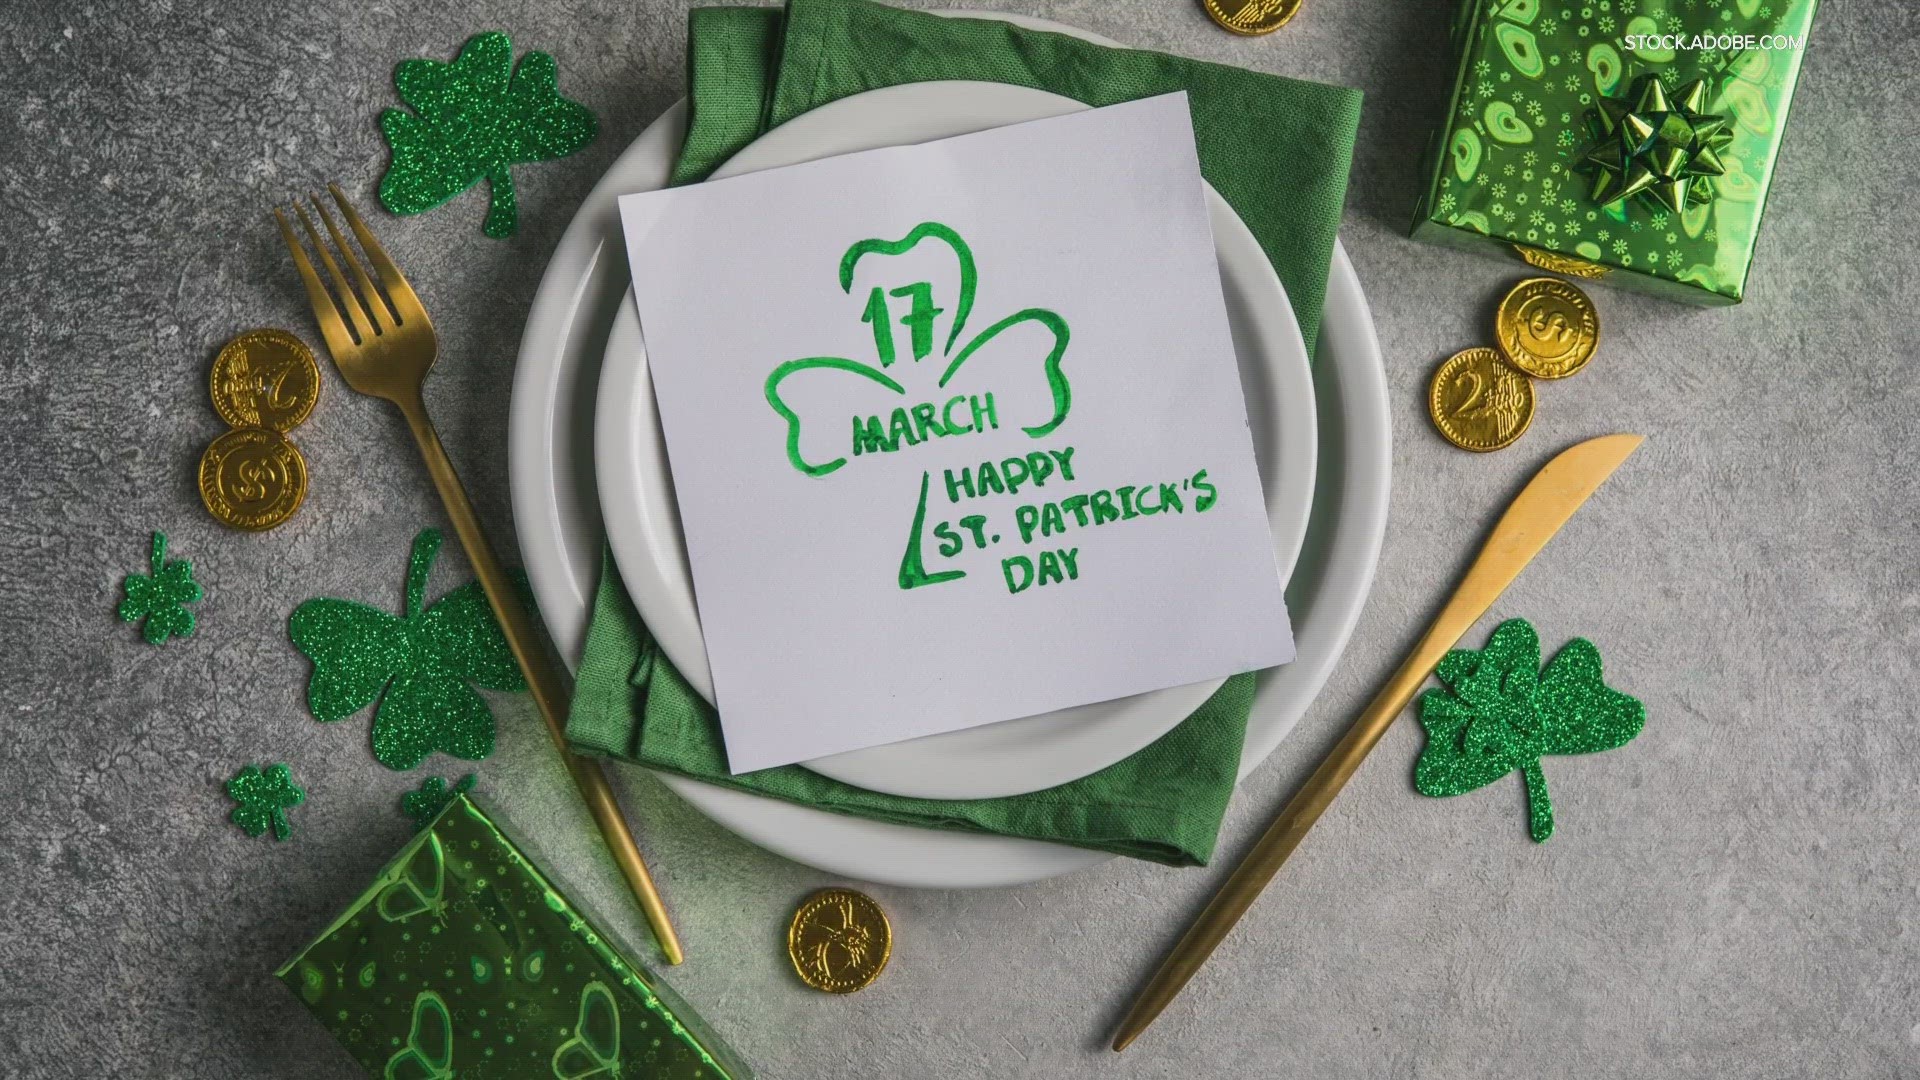 The Queen of Free shares some frugal, fun ways to make the most of St. Patrick’s Day.